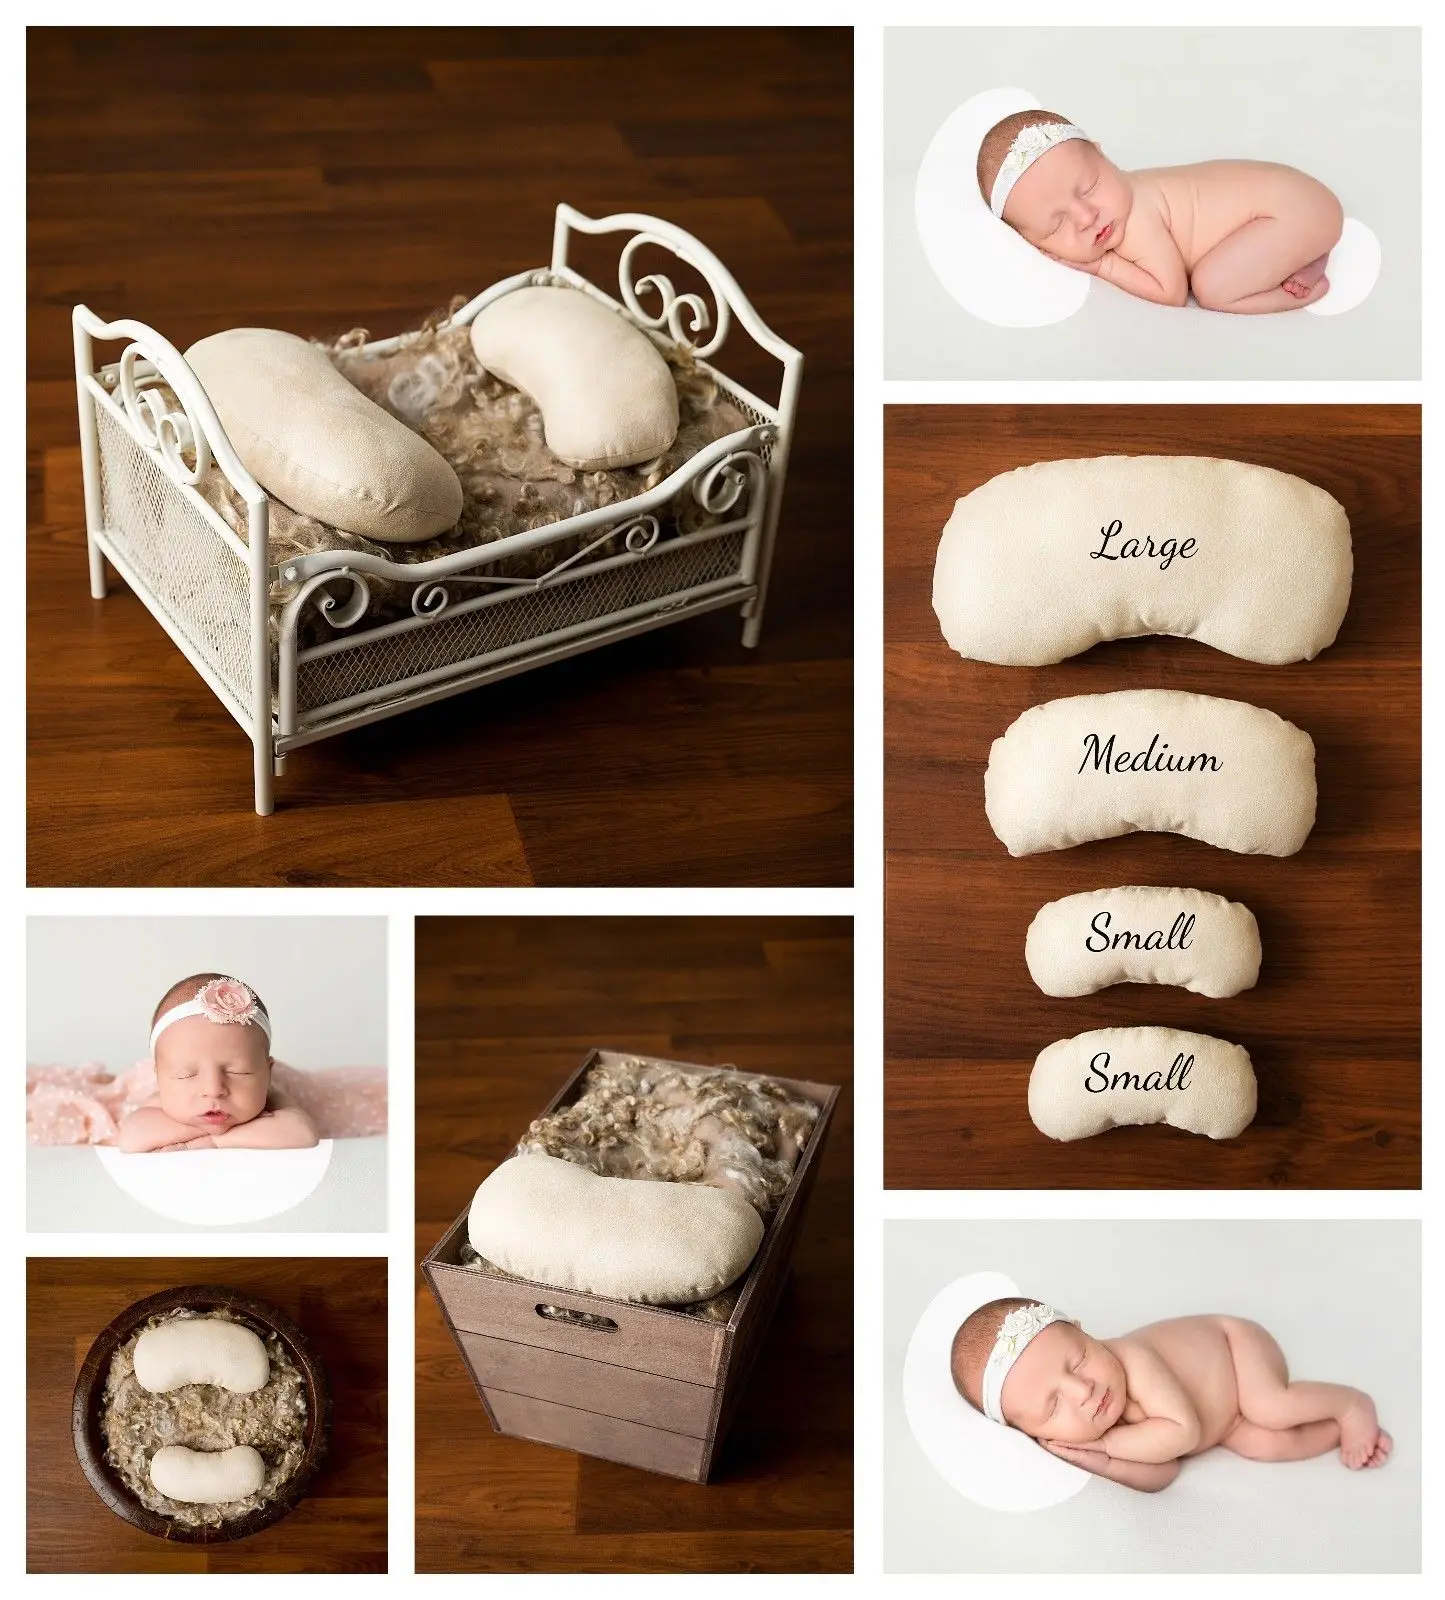 Hot Newborn Photography Posing Beans/ Pillows/ Props - 4 Pack Set Filled Baby Nest Posing Pod Aid Filled Stuff Poser Accessories